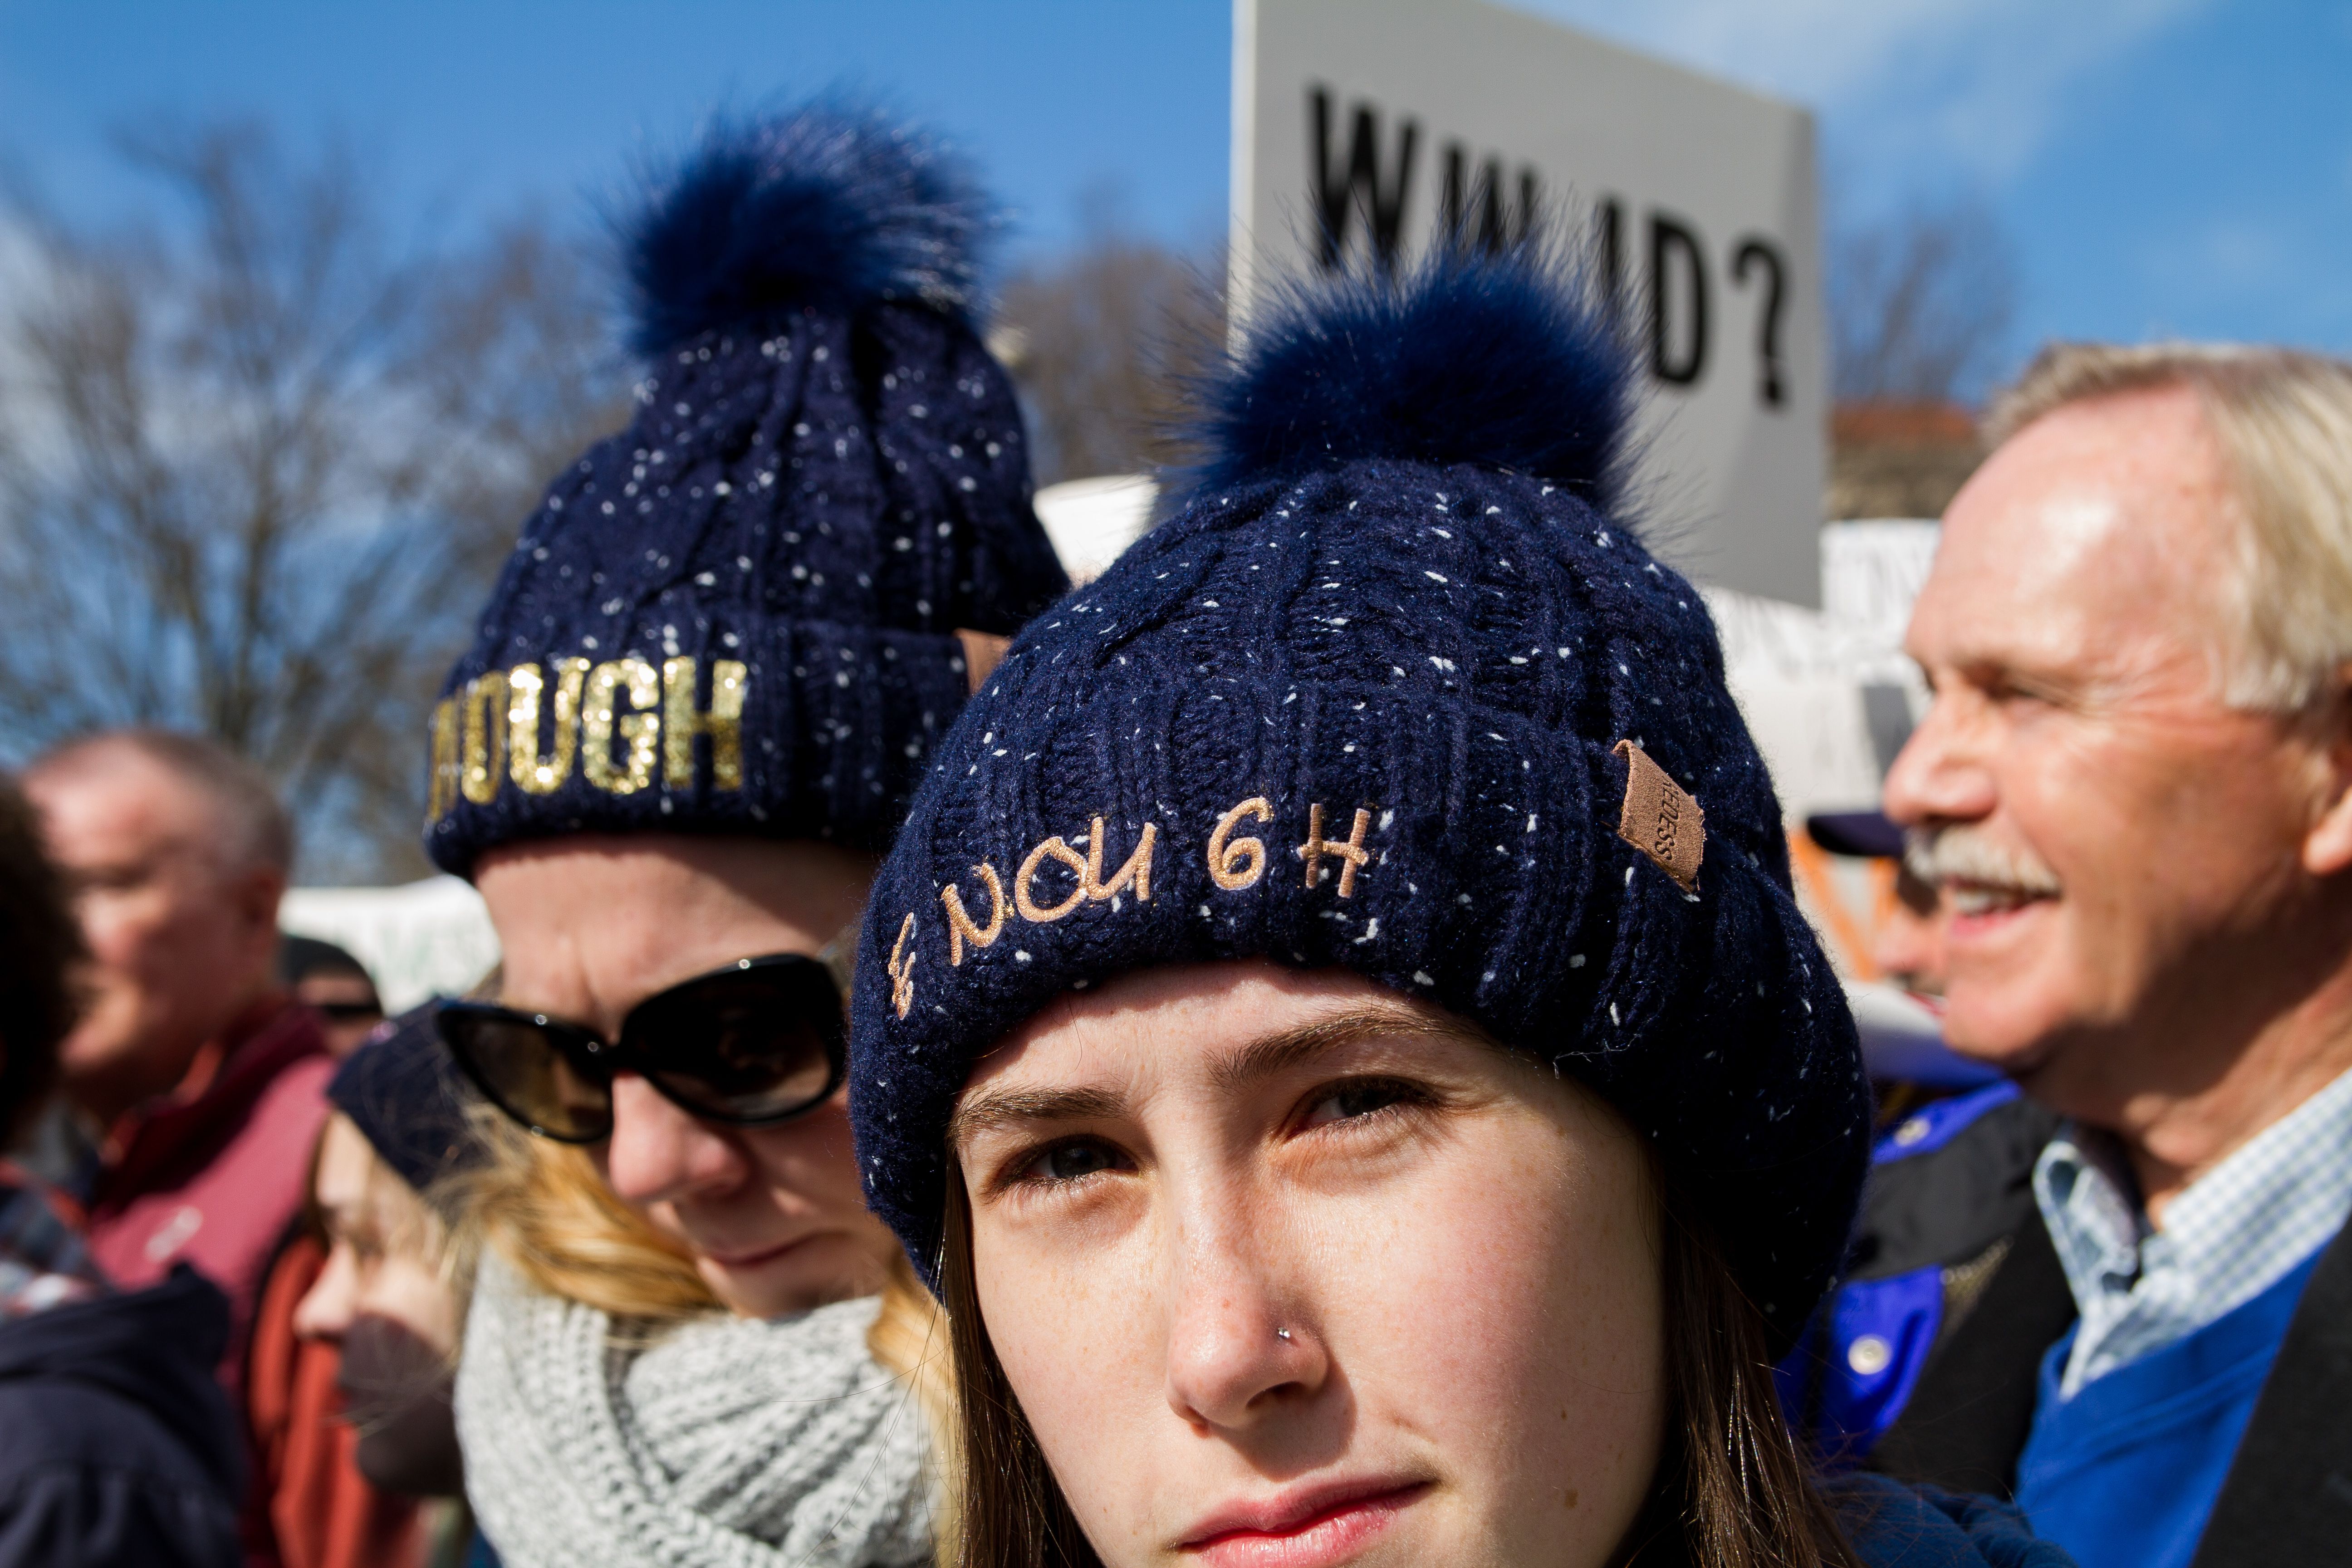 "Enough is enough" is a popular slogan tied to the March For Our Lives movement. Image by Alyssa Sperrazza. United States, 2018.